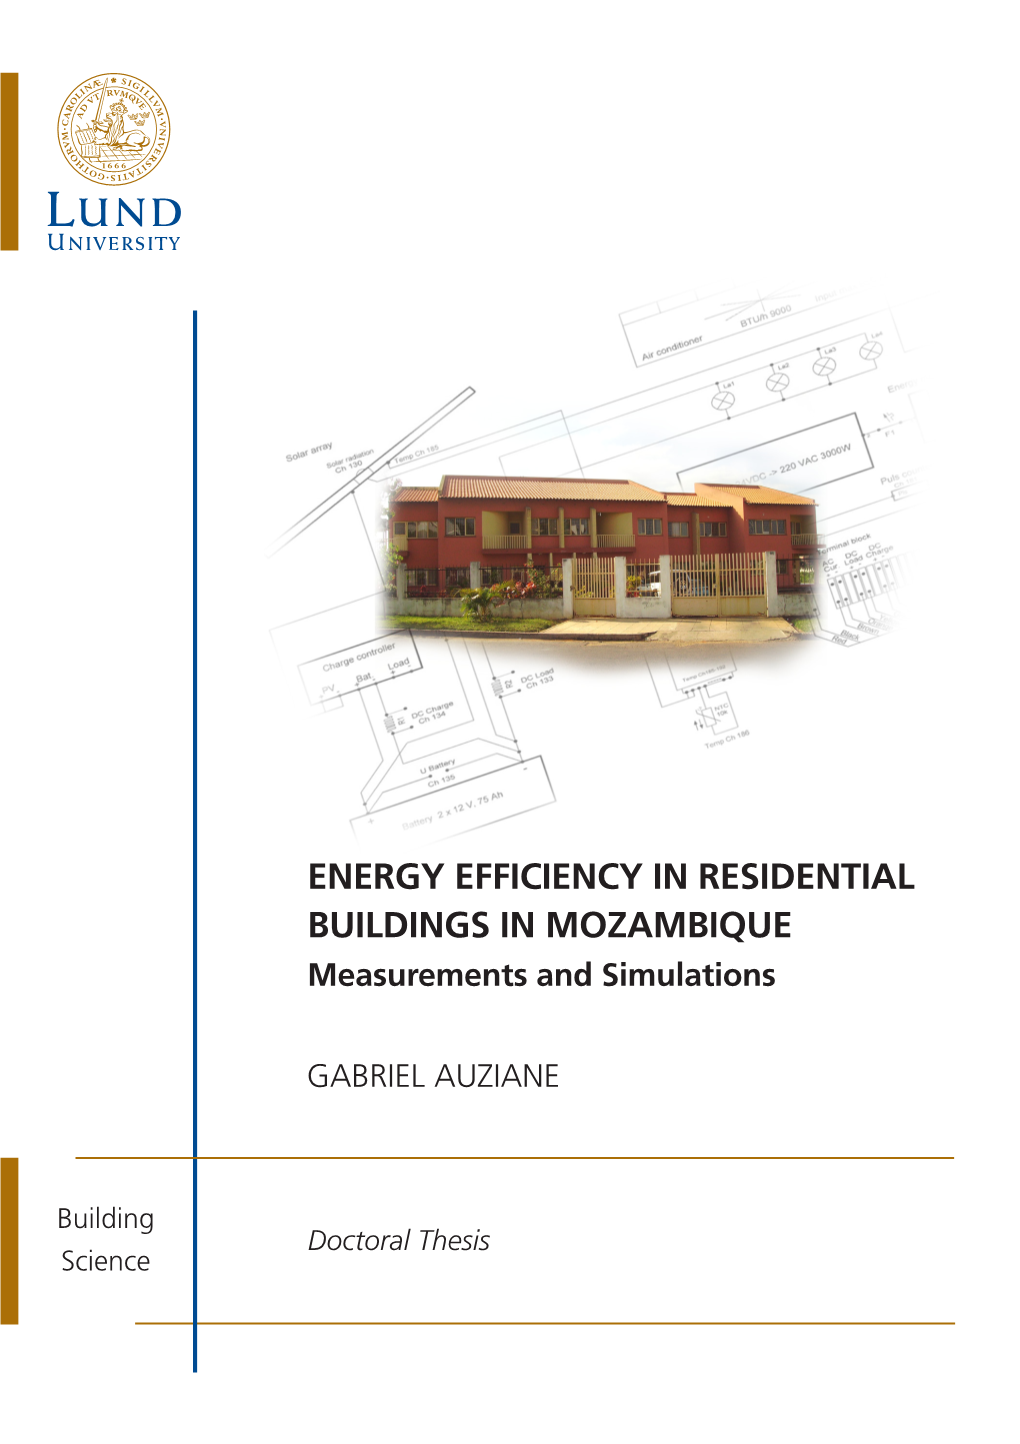 ENERGY EFFICIENCY in RESIDENTIAL BUILDINGS in MOZAMBIQUE Measurements and Simulations